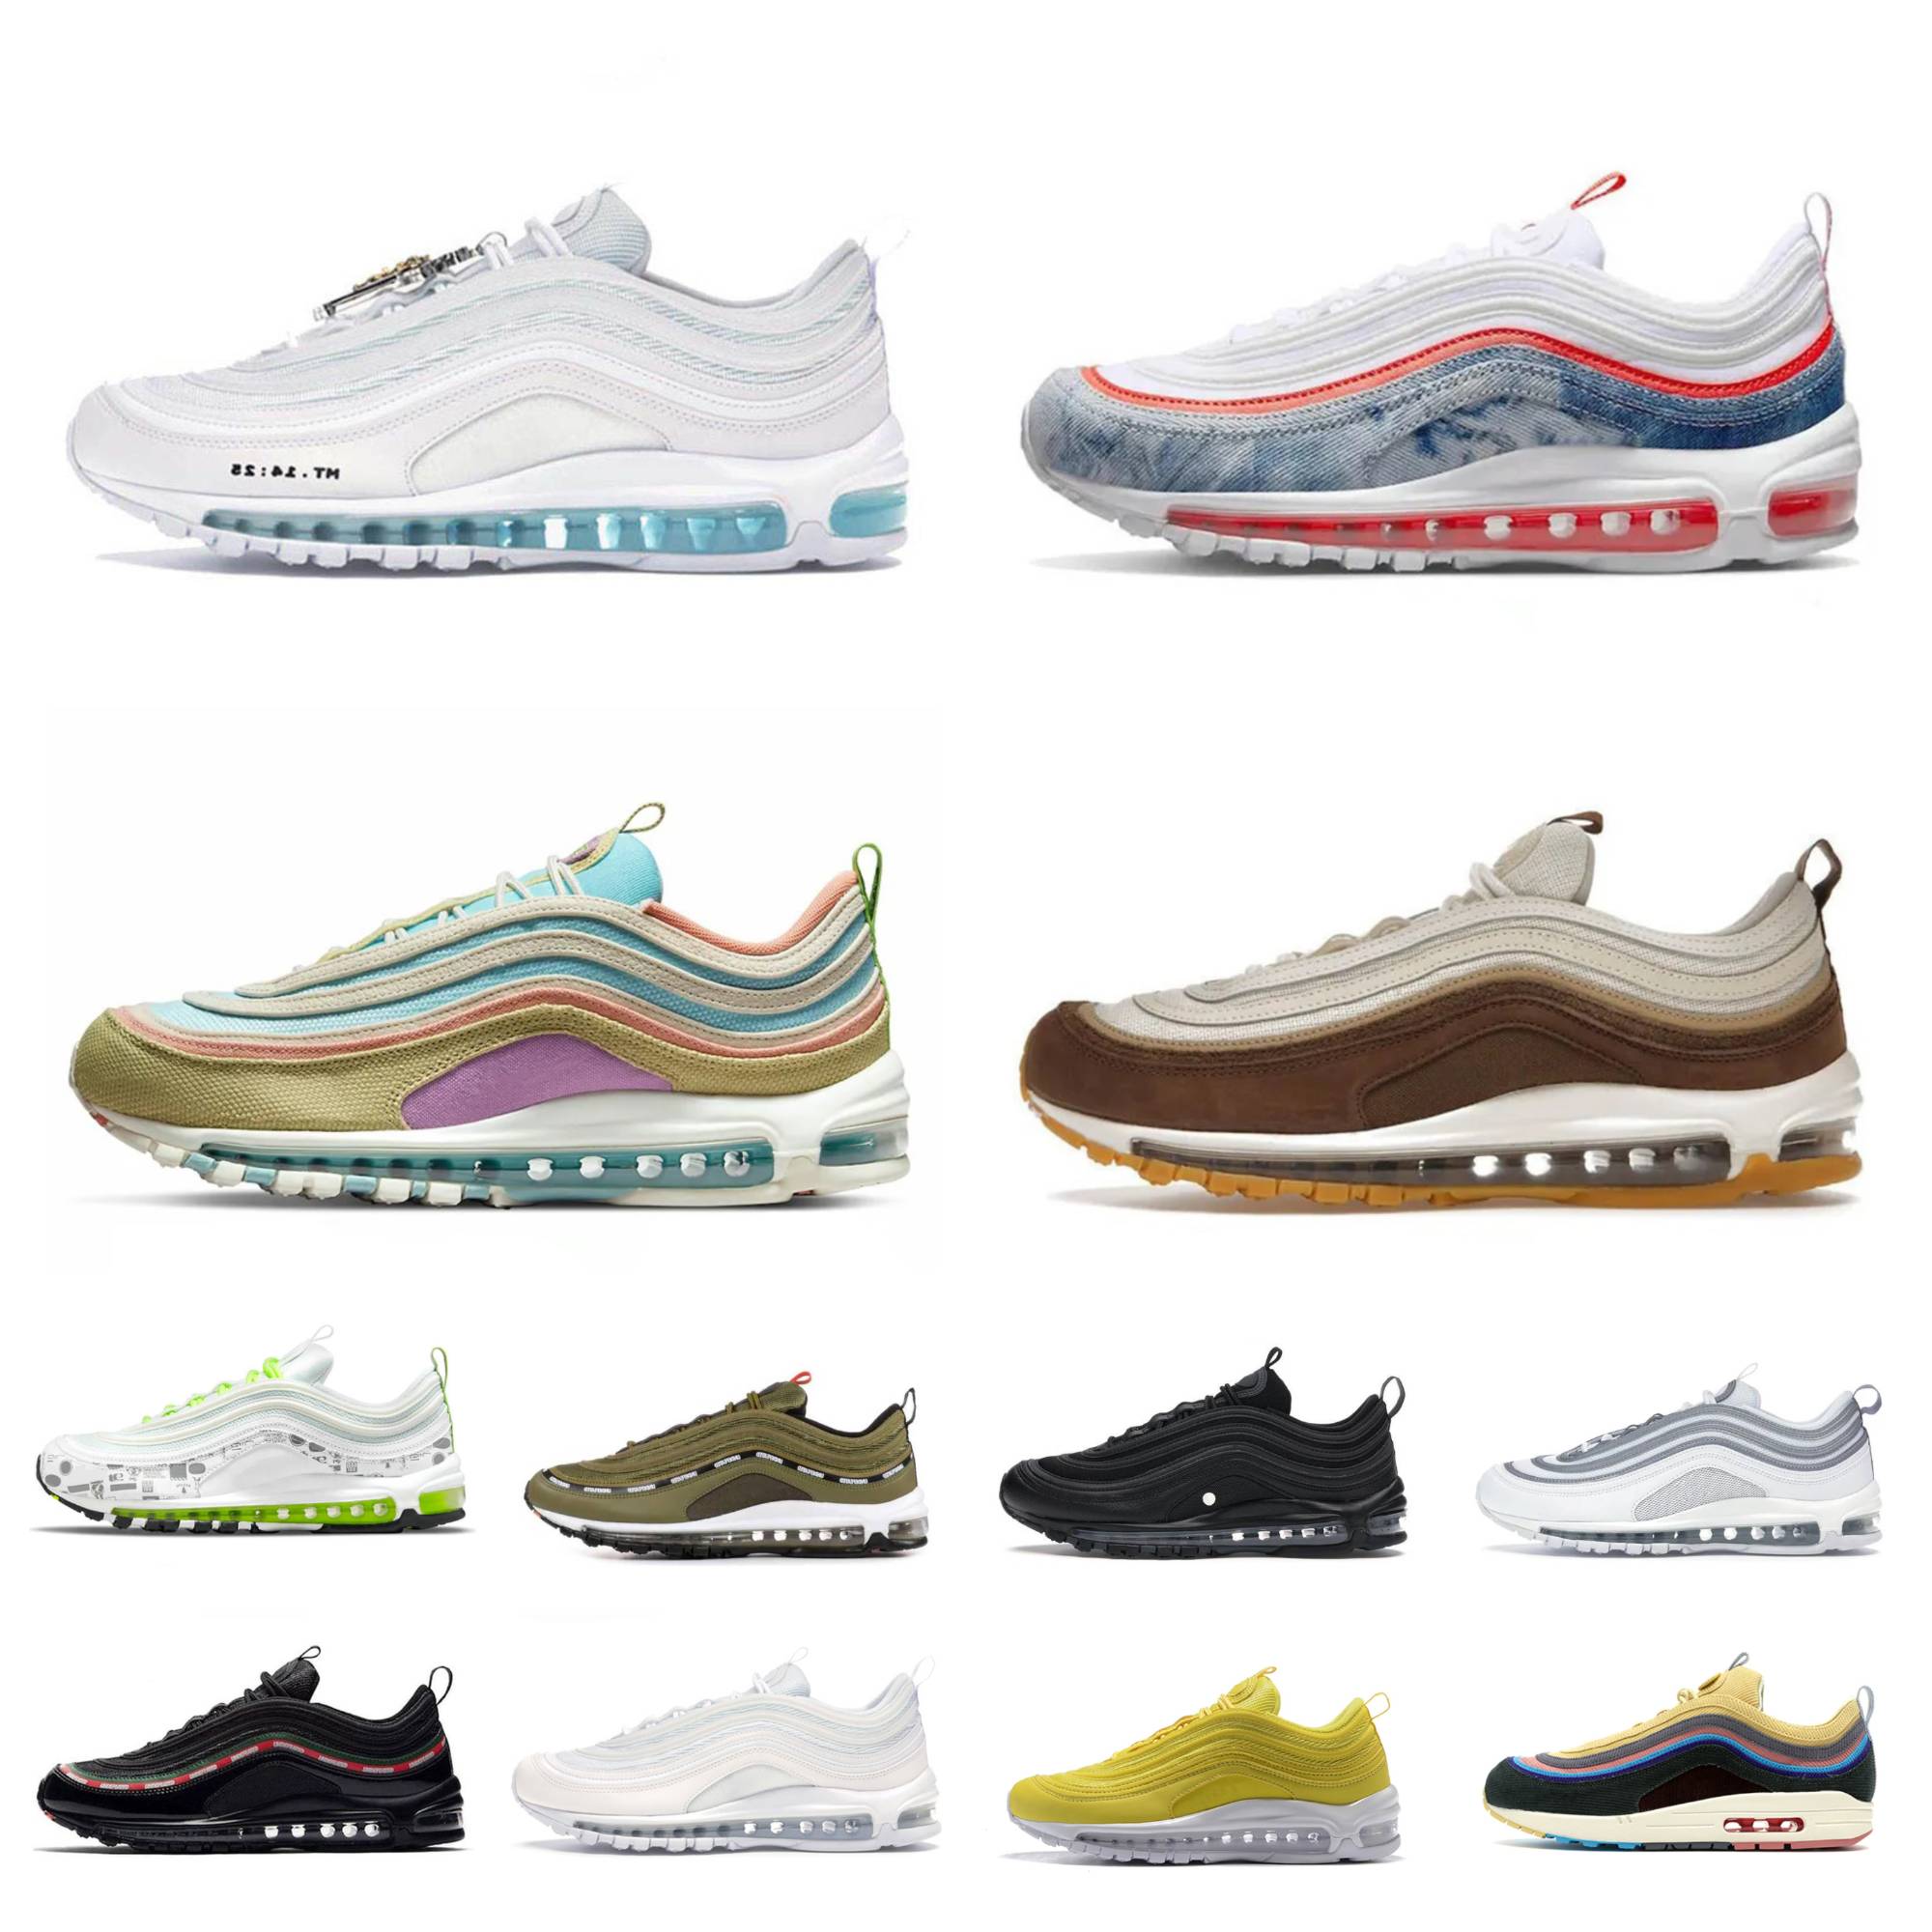 

Classic Max 97 Sean Wotherspoon Mens Running Shoes Air 97s Triple White Black sliver bullet metalic gold Golf NRG MSCHF X INRI Jesus Celestial airmaxs Women Sneakers, Bubble package bag